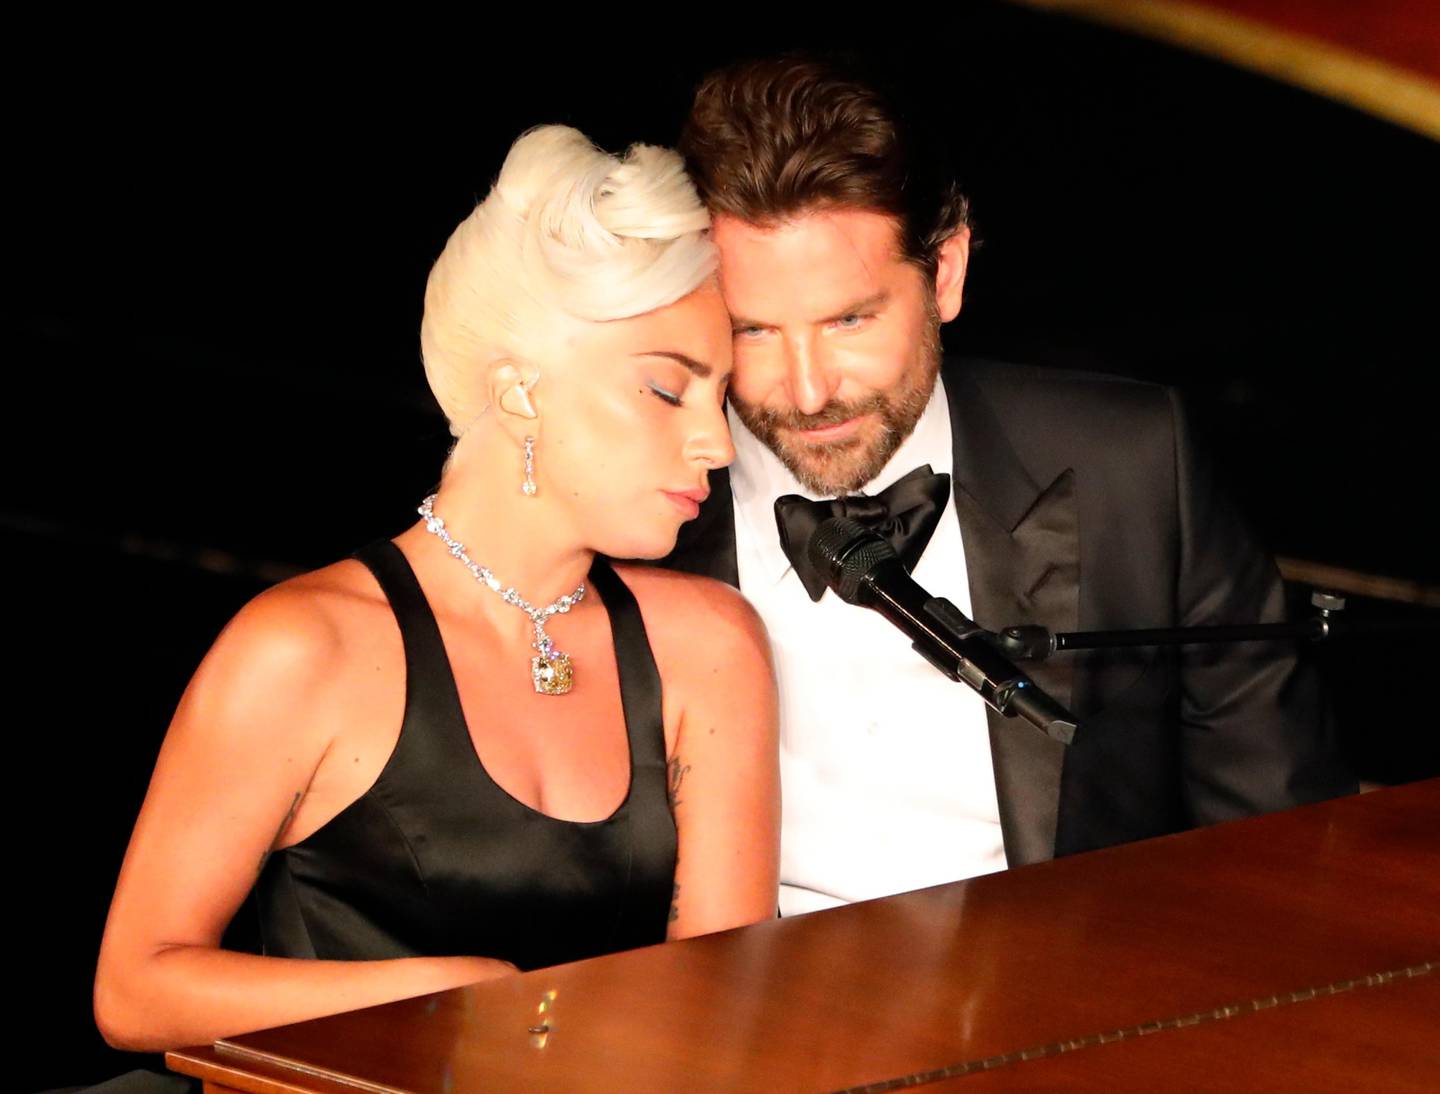 91st Academy Awards - Oscars Show - Hollywood, Los Angeles, California, U.S., February 24, 2019. Lady Gaga and Bradley Cooper perform "Shallow"  from "A Star Is Born." REUTERS/Mike Blake